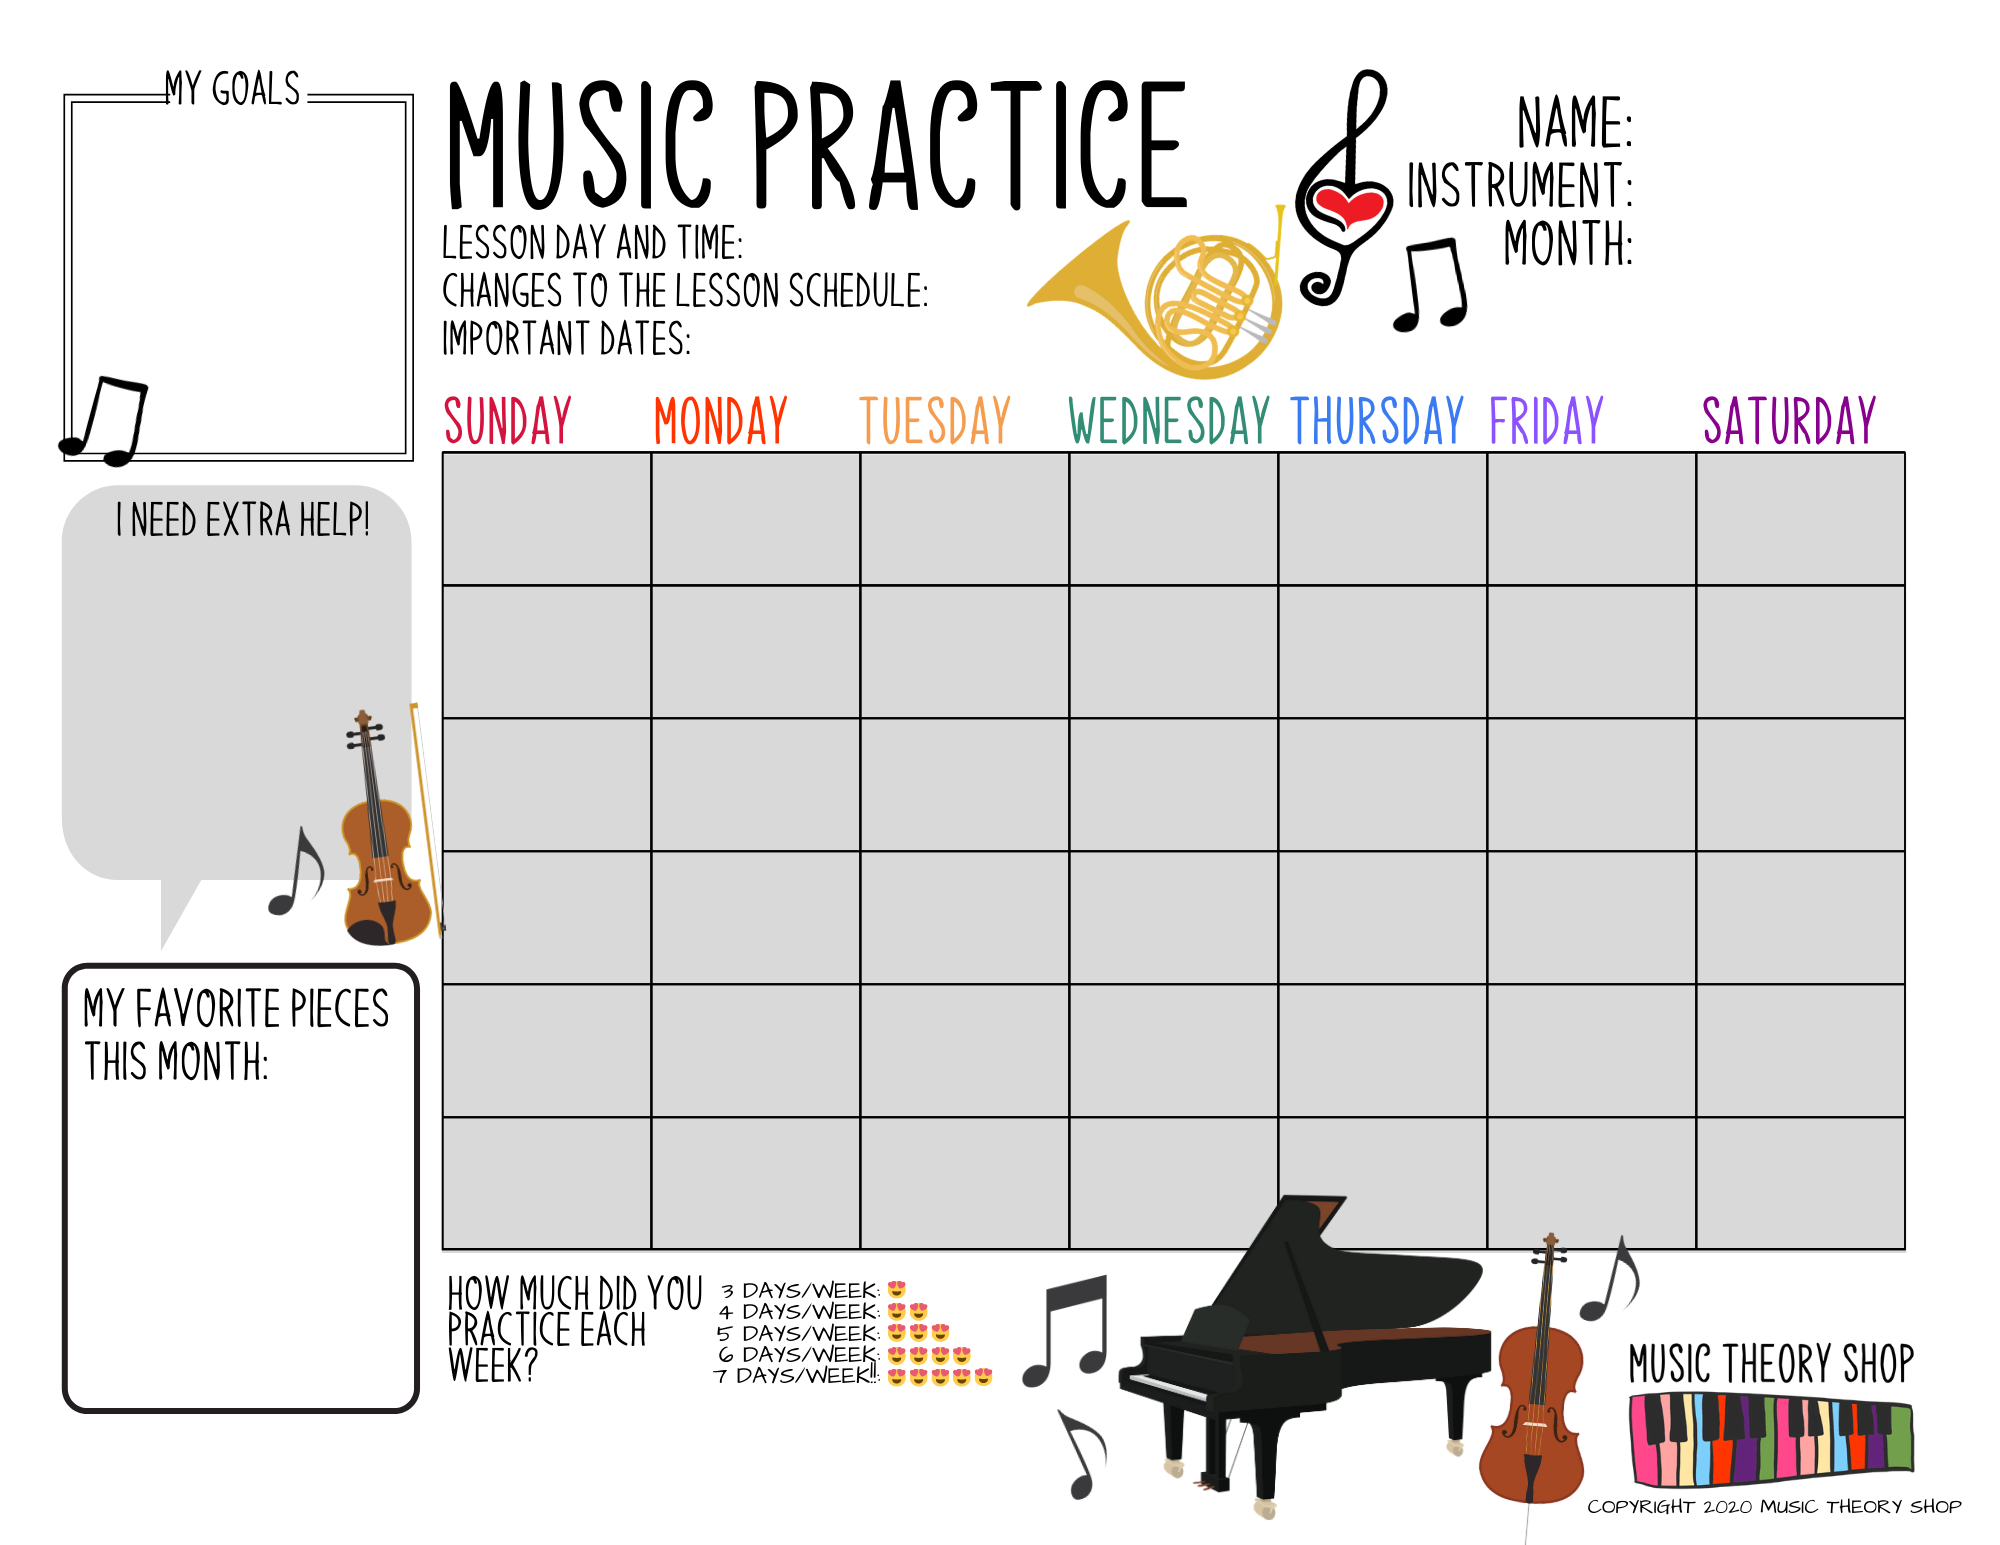 3 Printable Music Practice Charts Tracker Music Lessons Music Progr Music Theory Shop